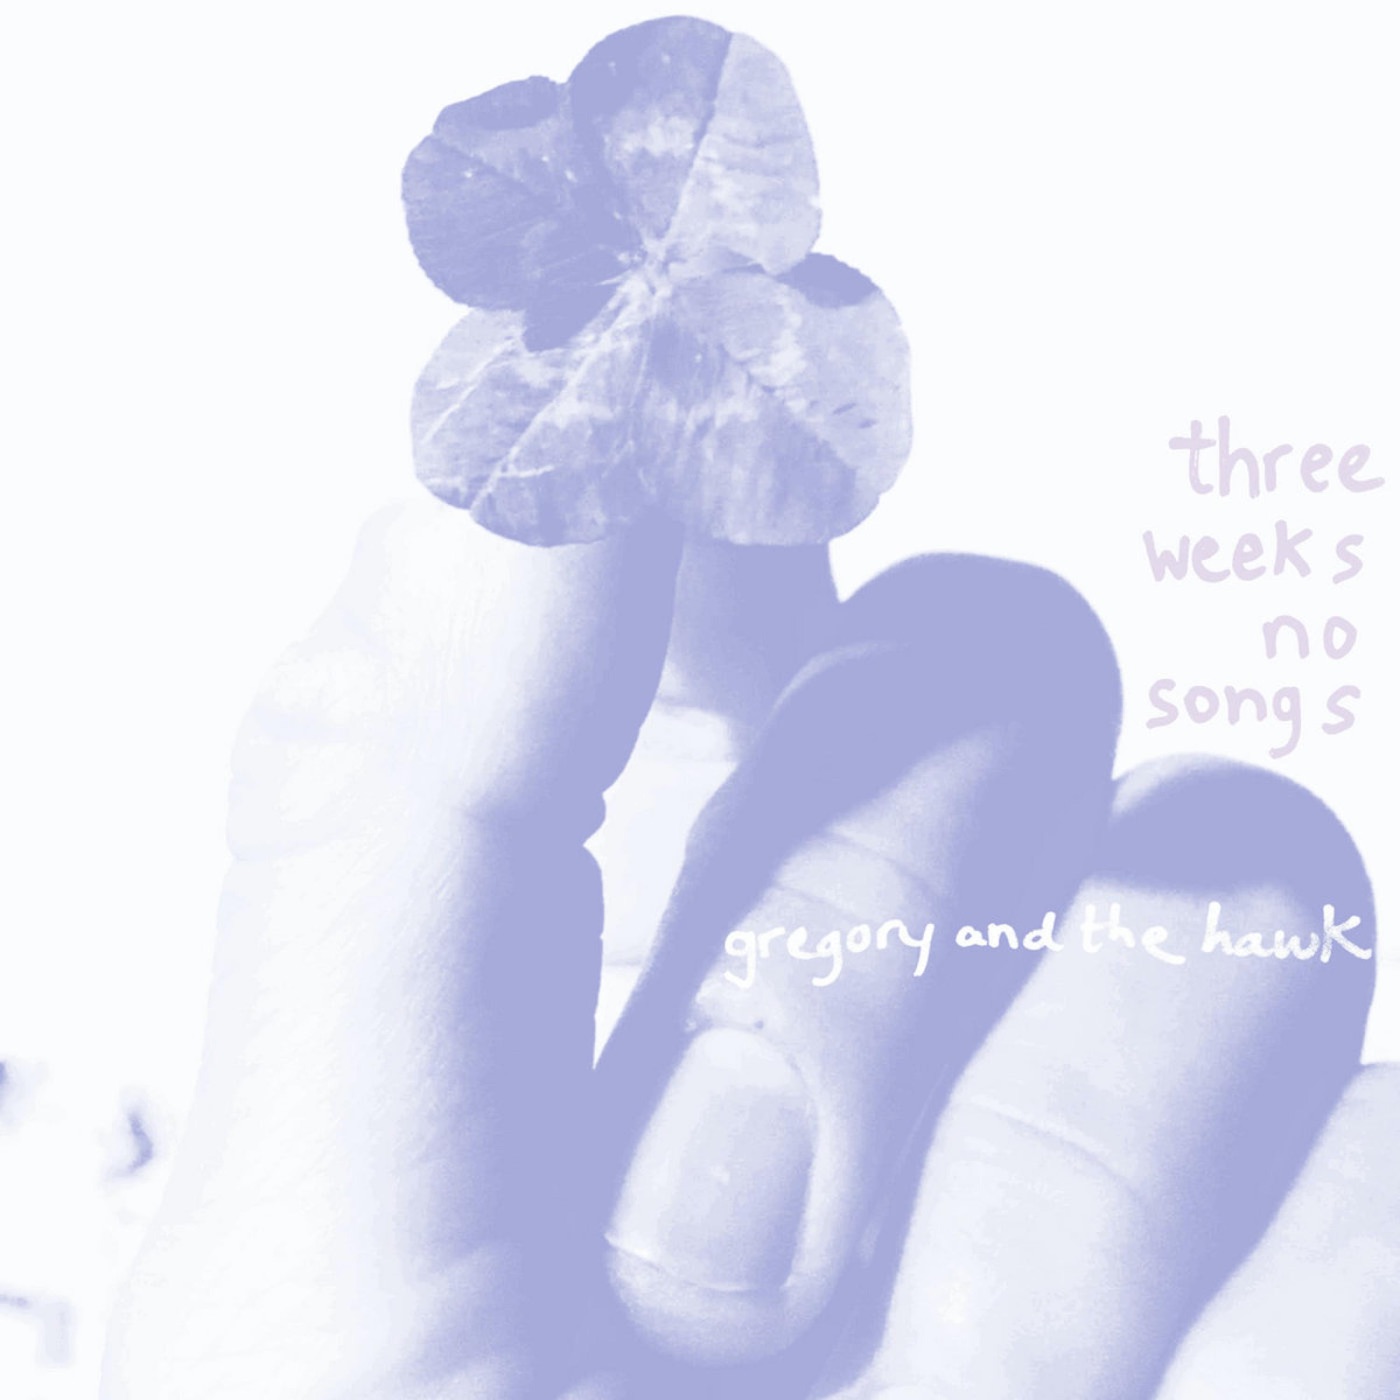 Three Weeks No Songs by Gregory and the Hawk